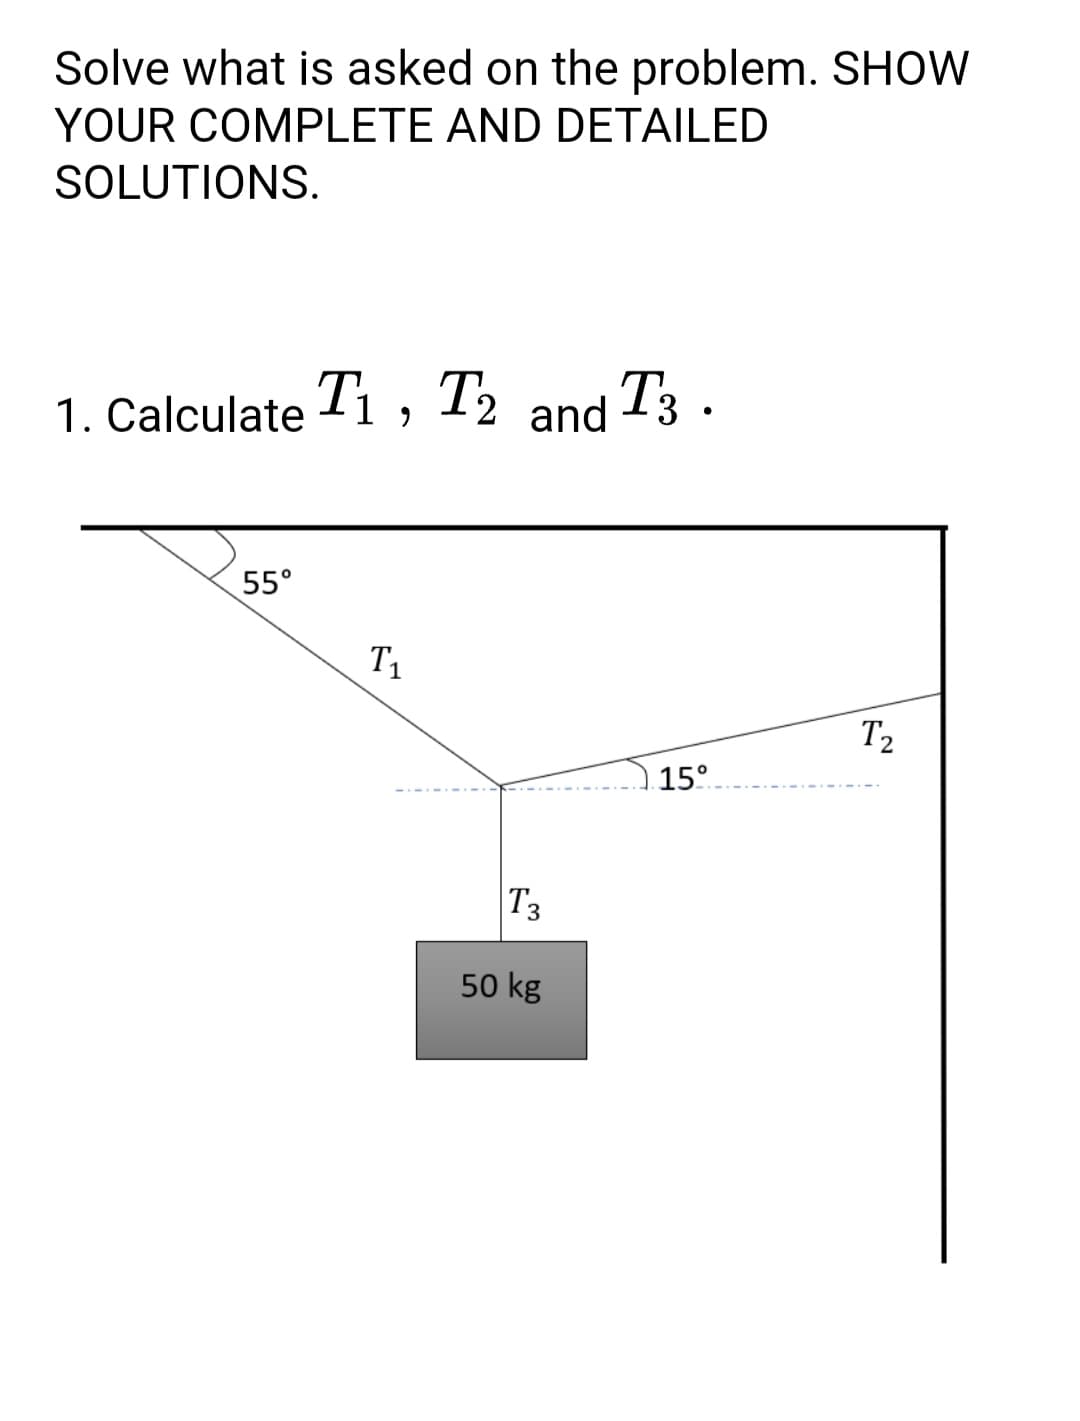 Solve what is asked on the problem. SHOW
YOUR COMPLETE AND DETAILED
SOLUTIONS.
1. Calculate li , T½ and T3 .
55°
T1
T2
15°
T3
50 kg
